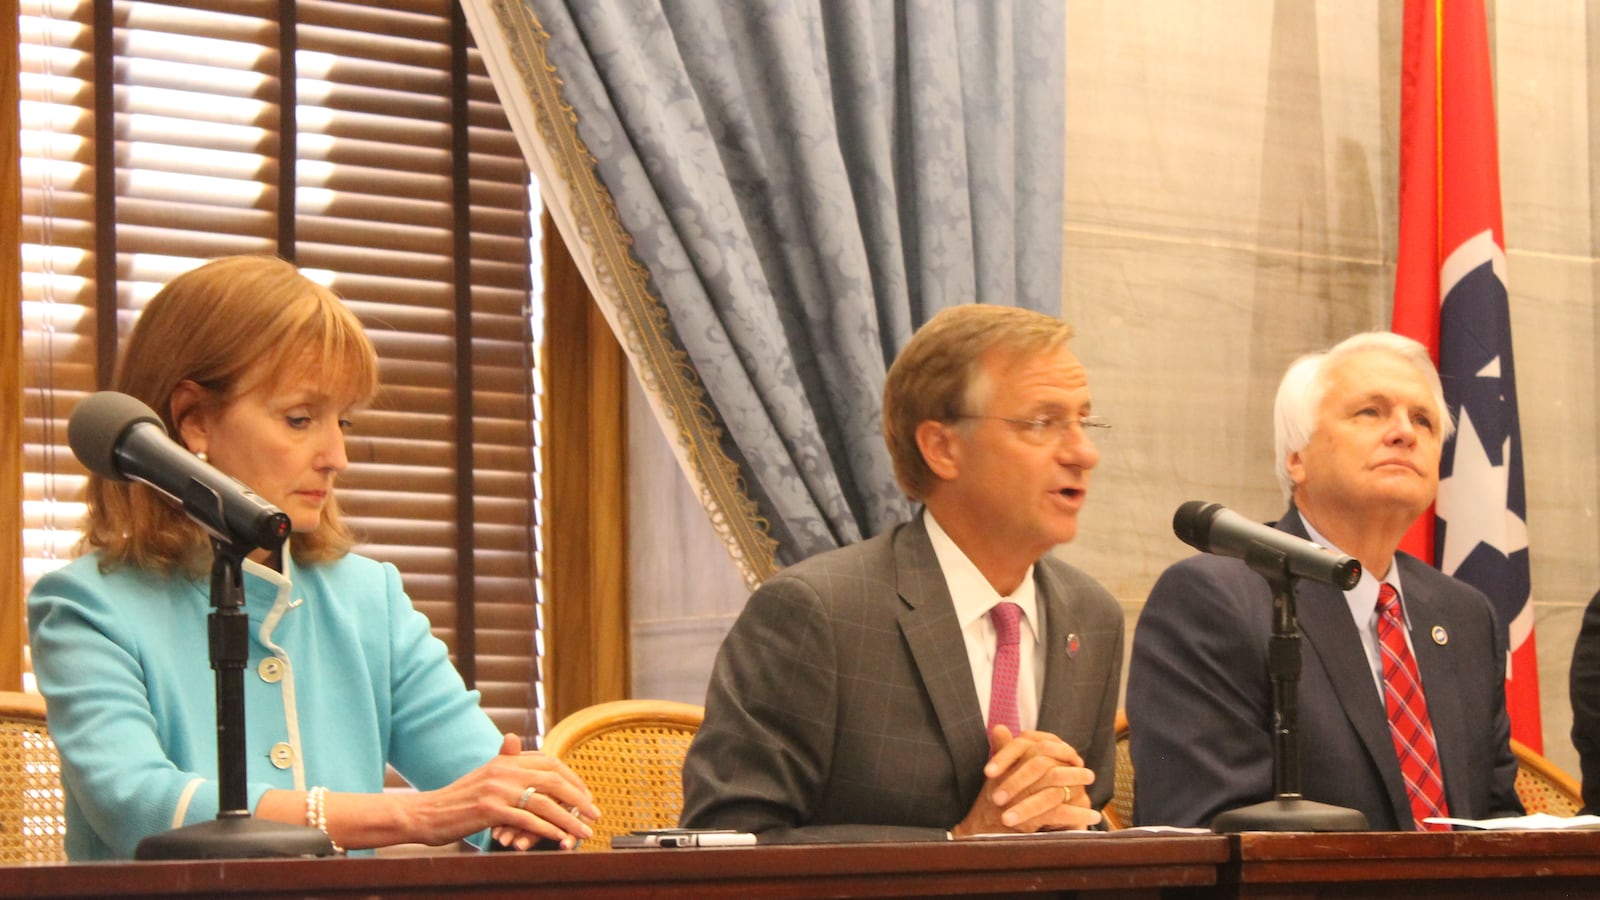 Gov. Bill Haslam, flanked by House Speaker Beth Harwell and Lt. Gov. Ron Ramsey, discuss the business of the 109th Tennessee General Assembly, which came to a close on Wednesday.